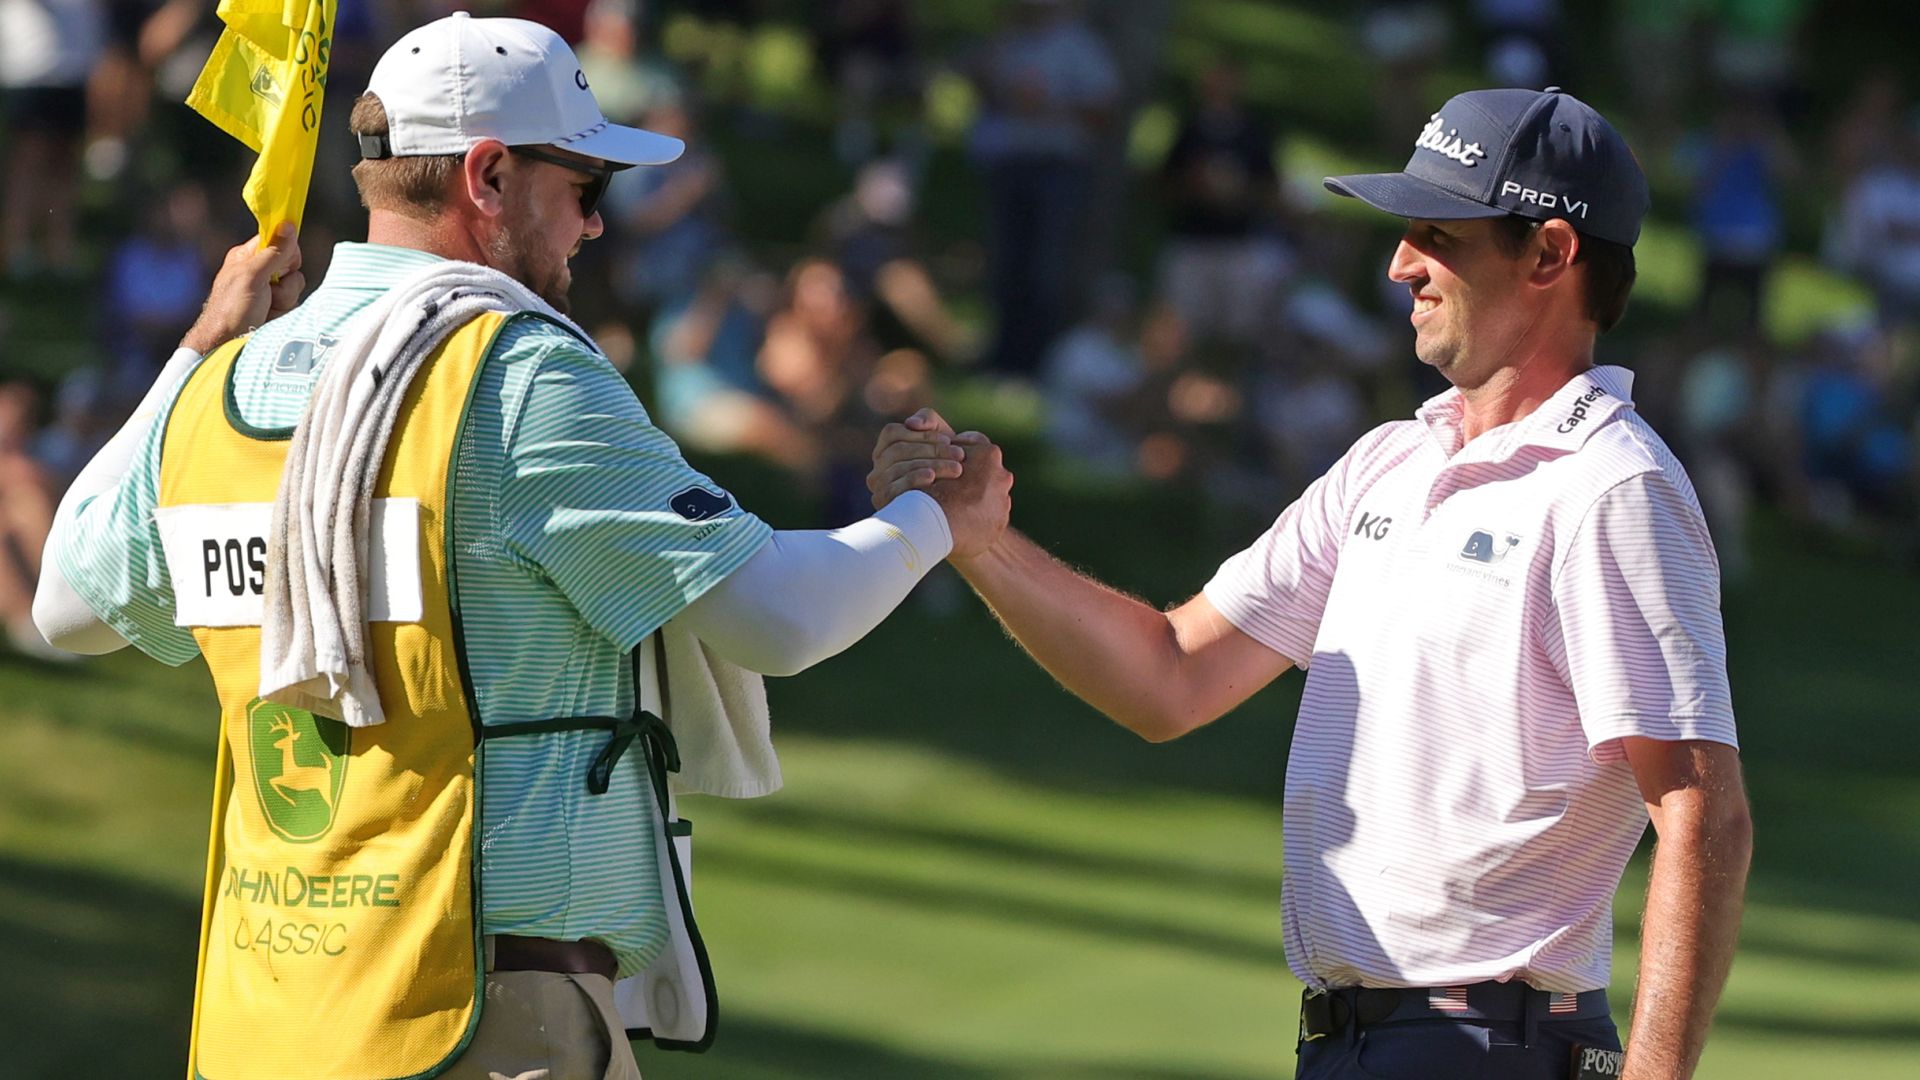 Poston books spot at The Open with John Deere Classic win